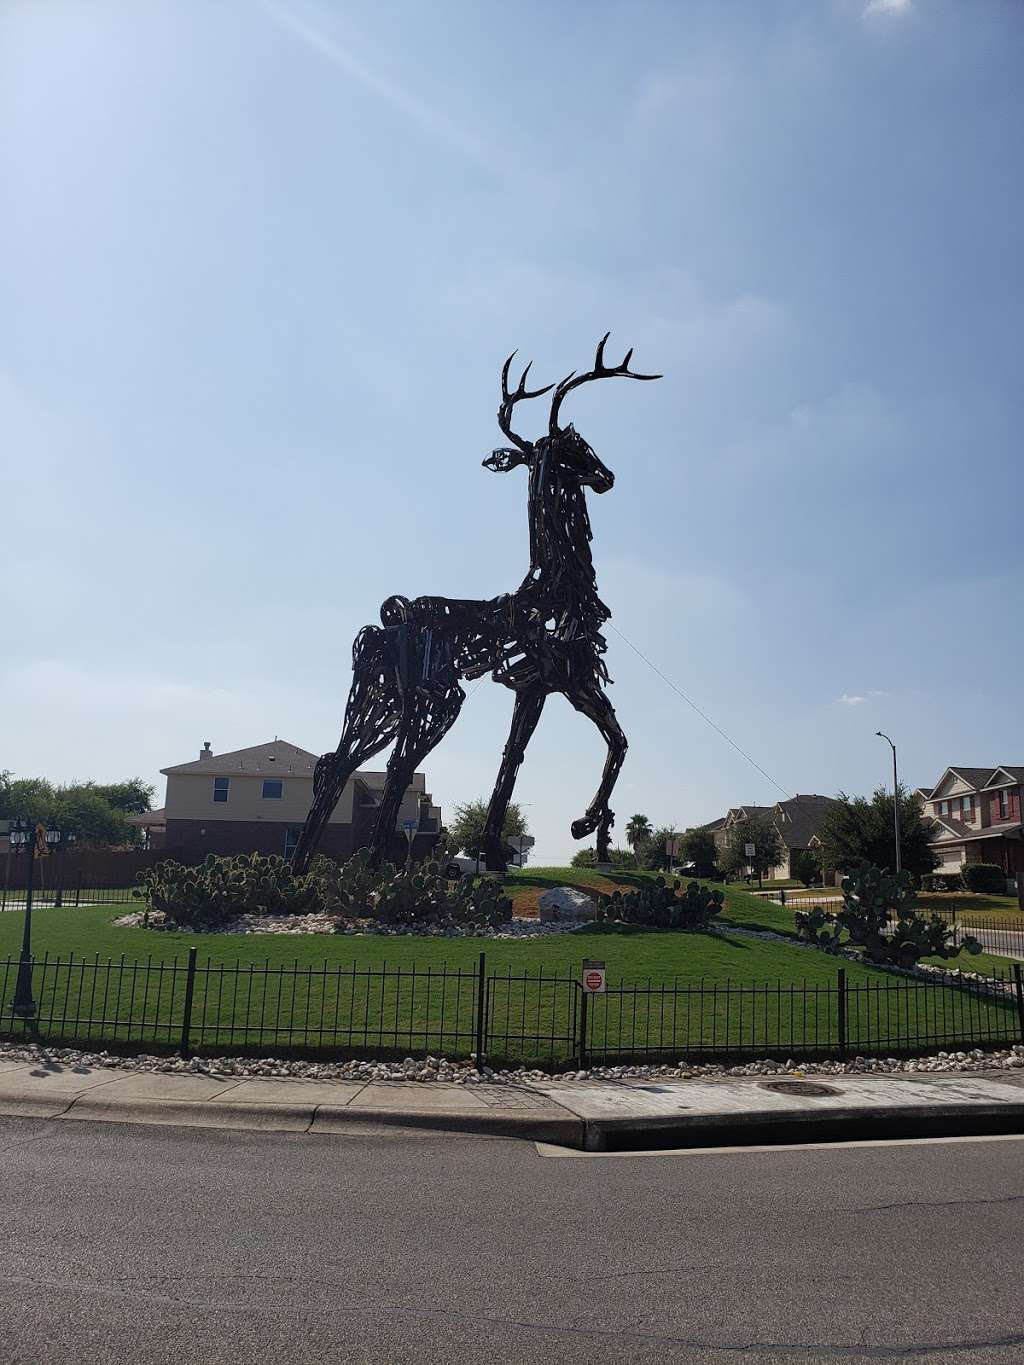 Giant Stag Statue | 05089-000-1000, Converse, TX 78109